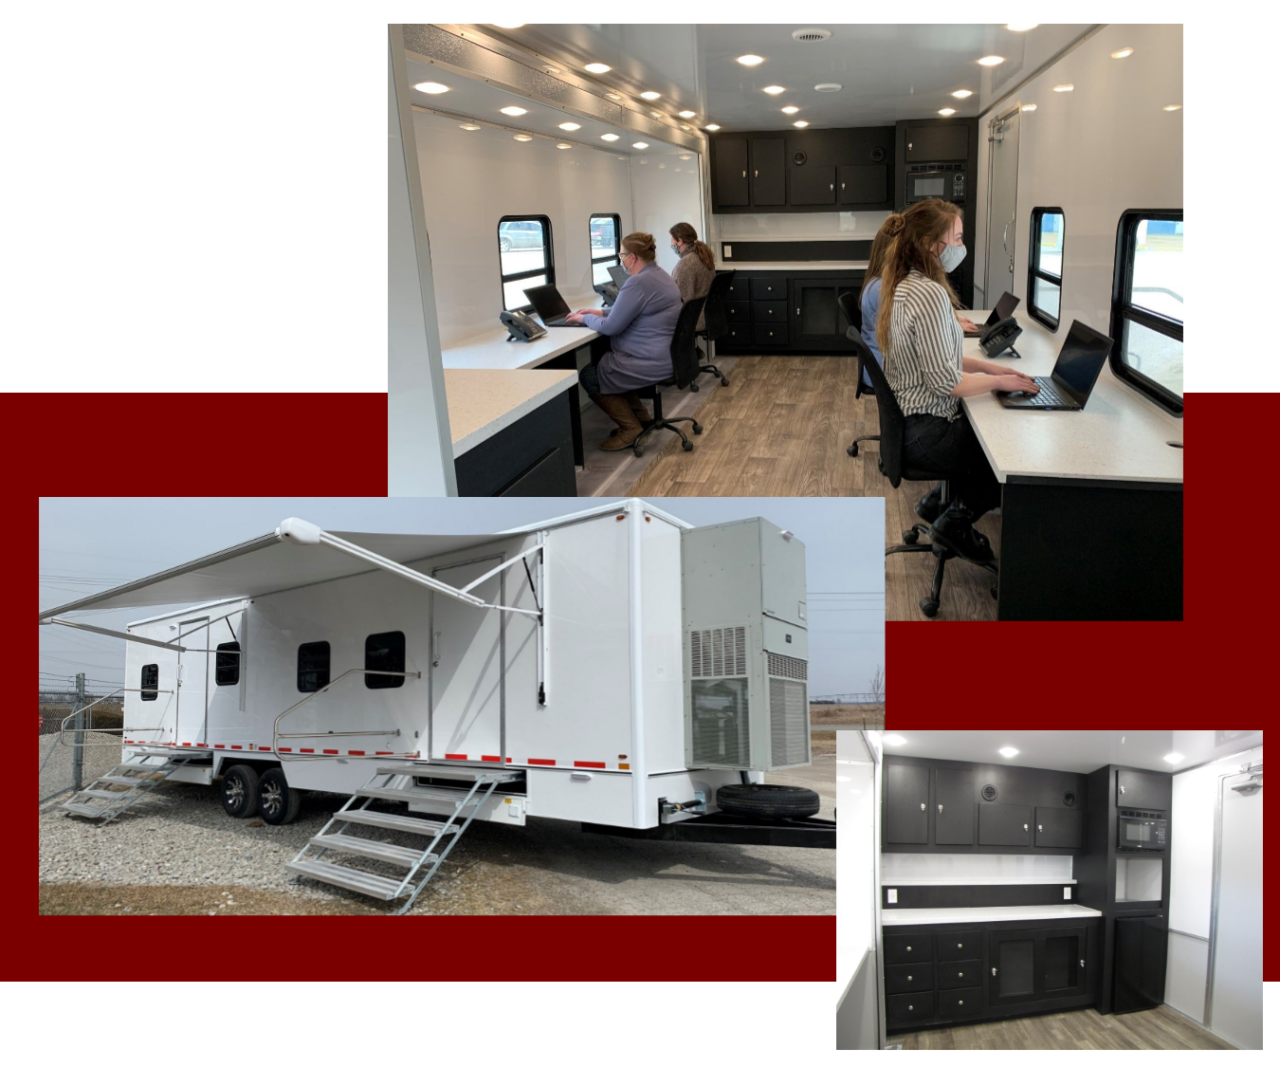 Mobile office trailers or portable mobile office by Lodging Solutions and Industrial tents